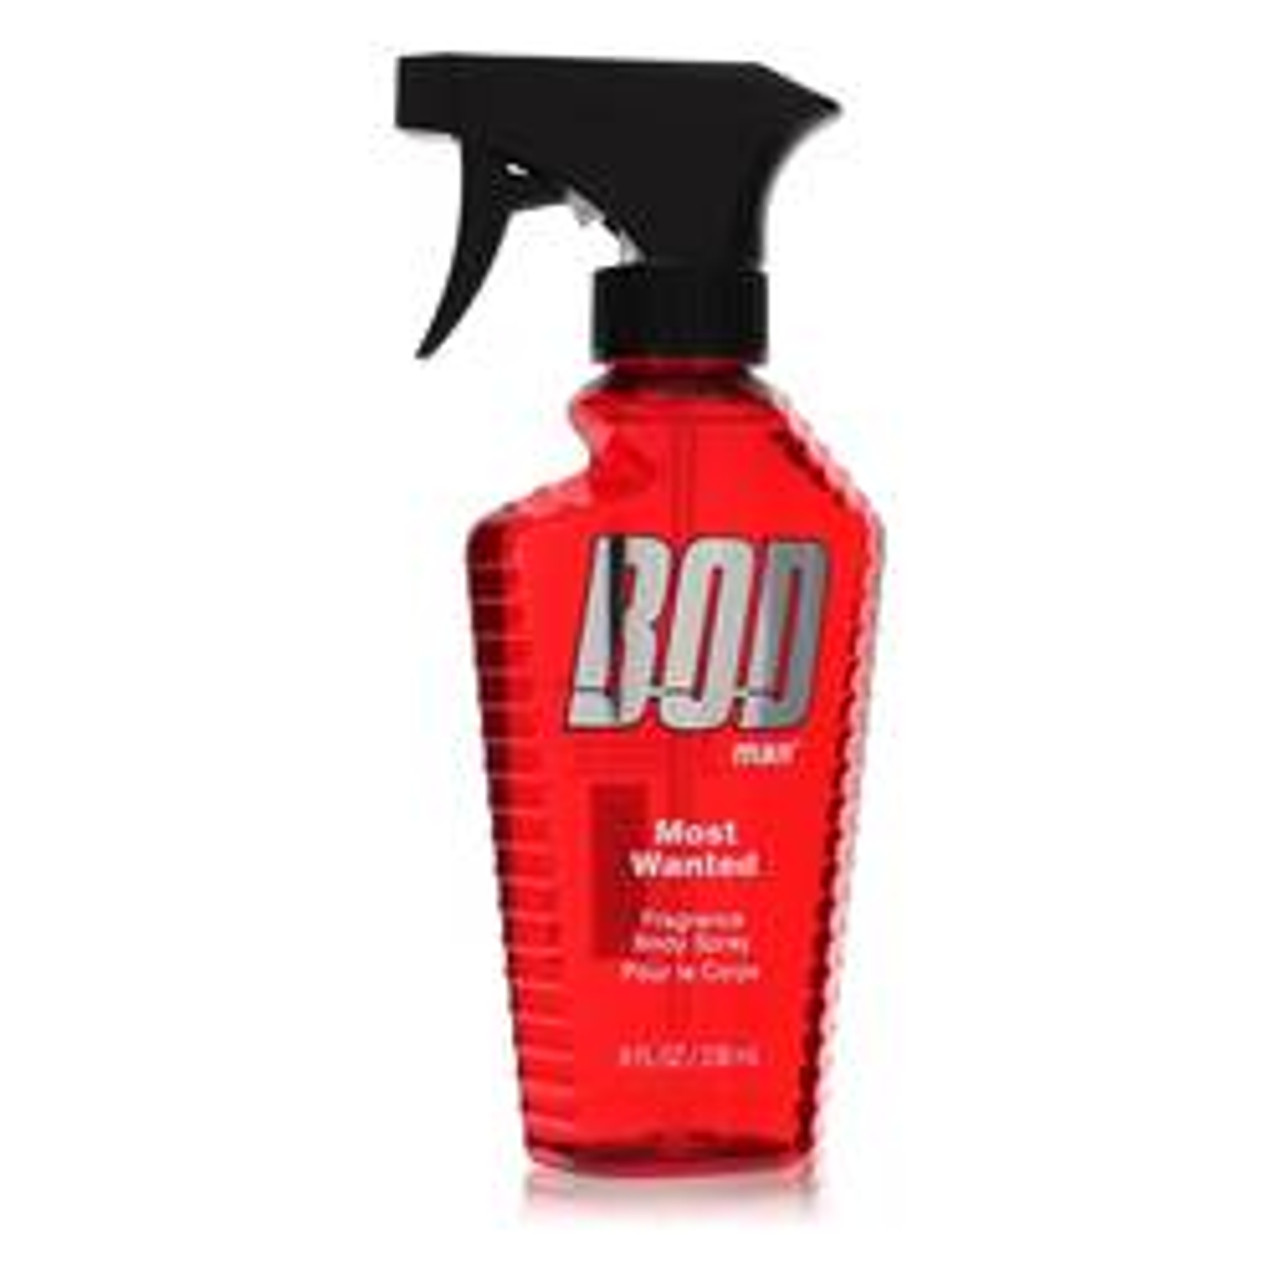 Bod Man Most Wanted Cologne By Parfums De Coeur Fragrance Body Spray 8 oz for Men - [From 27.00 - Choose pk Qty ] - *Ships from Miami